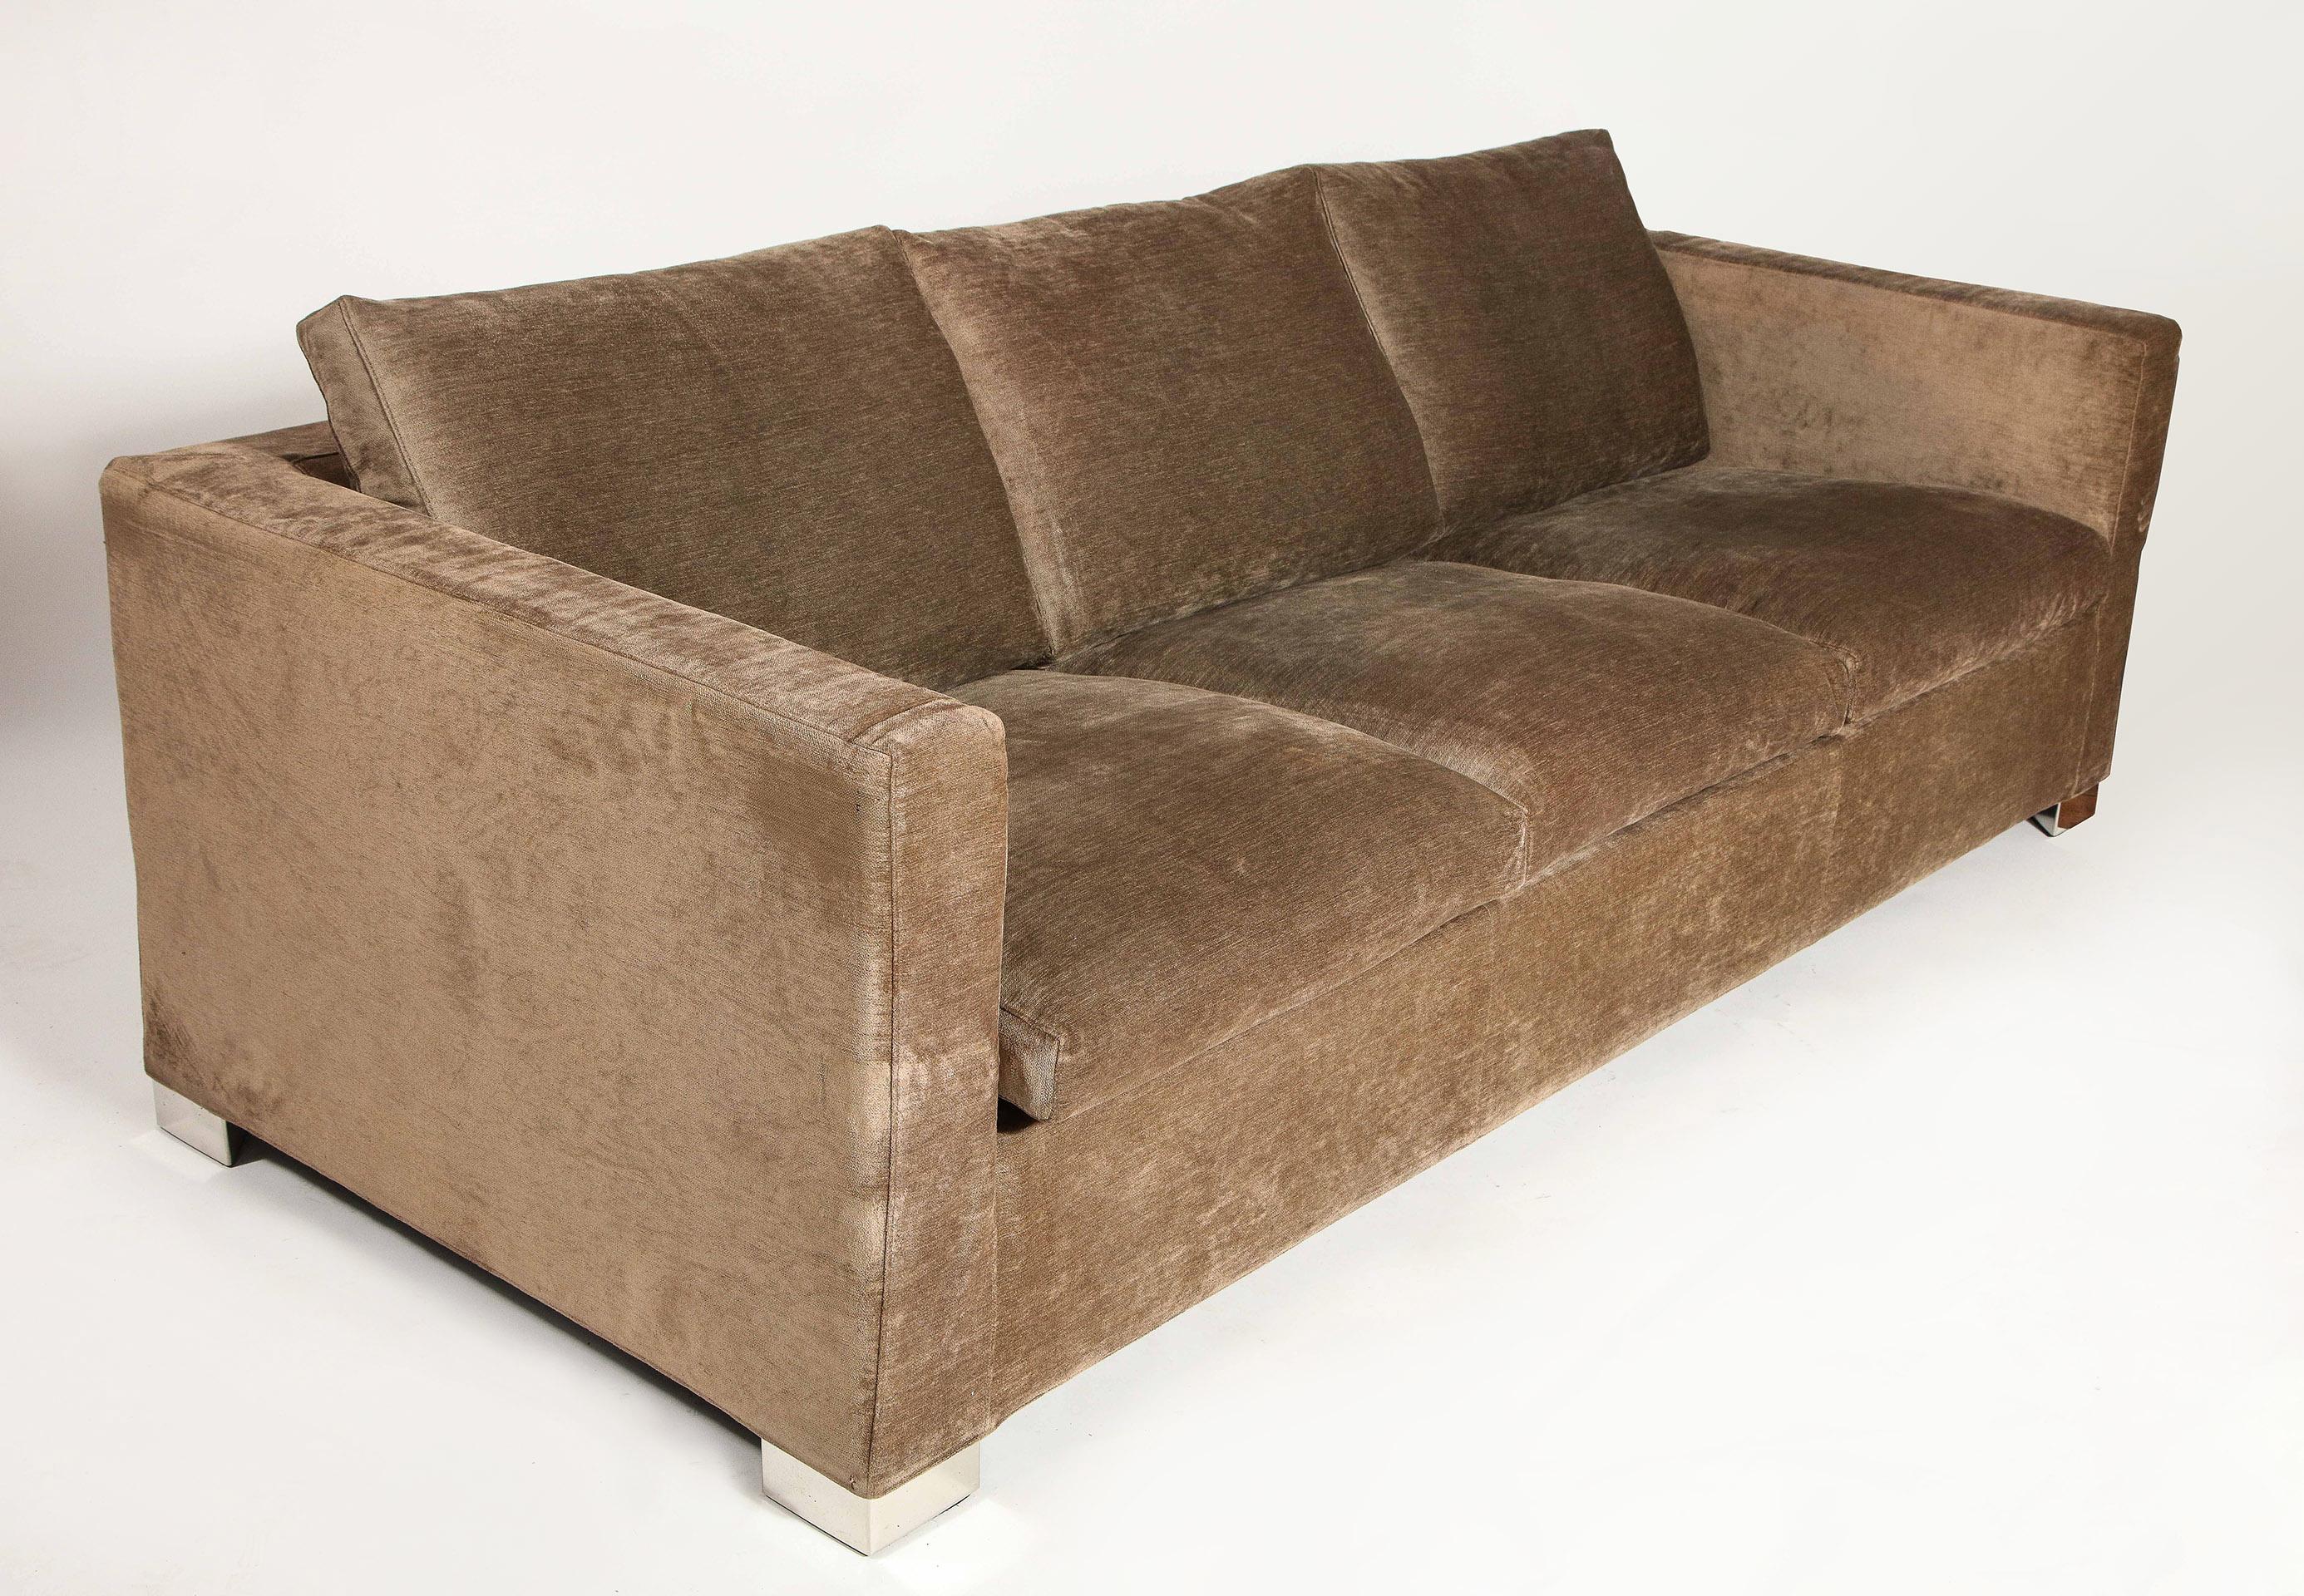 The signed three-seat sofa is of original upholstery in a textured mocha color over four chrome block feet. Sofa contains original 